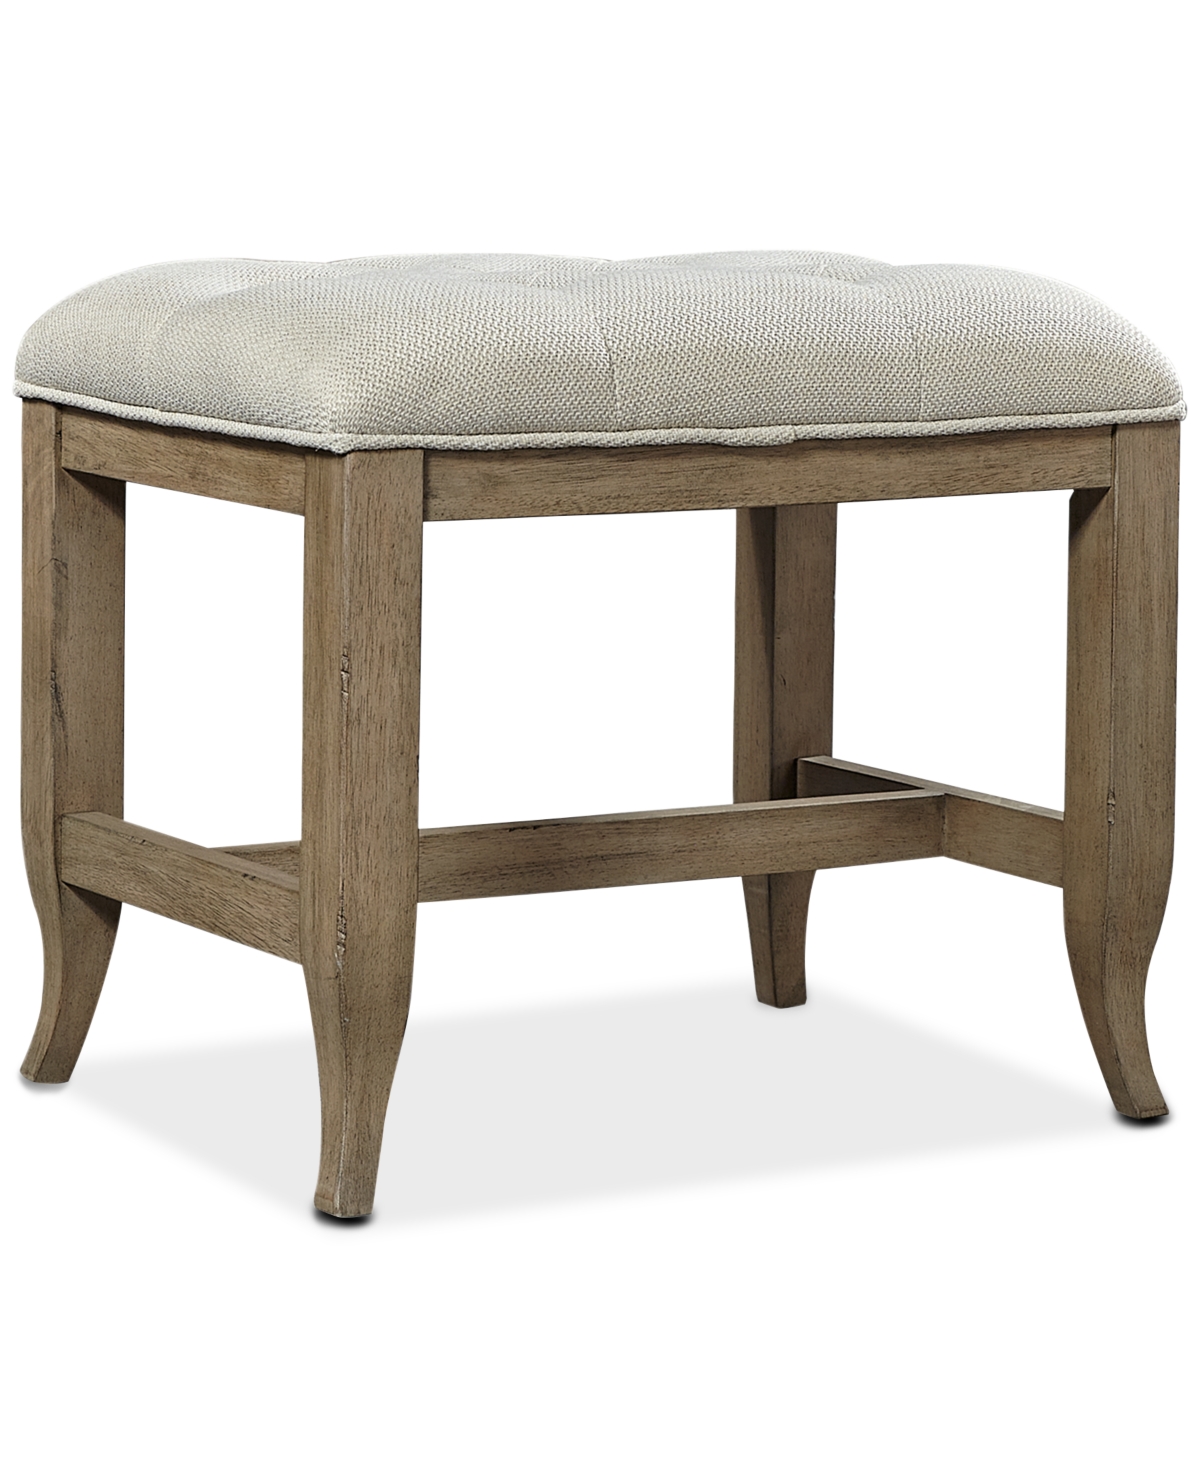 Furniture Provence Bench In Lt. Brown